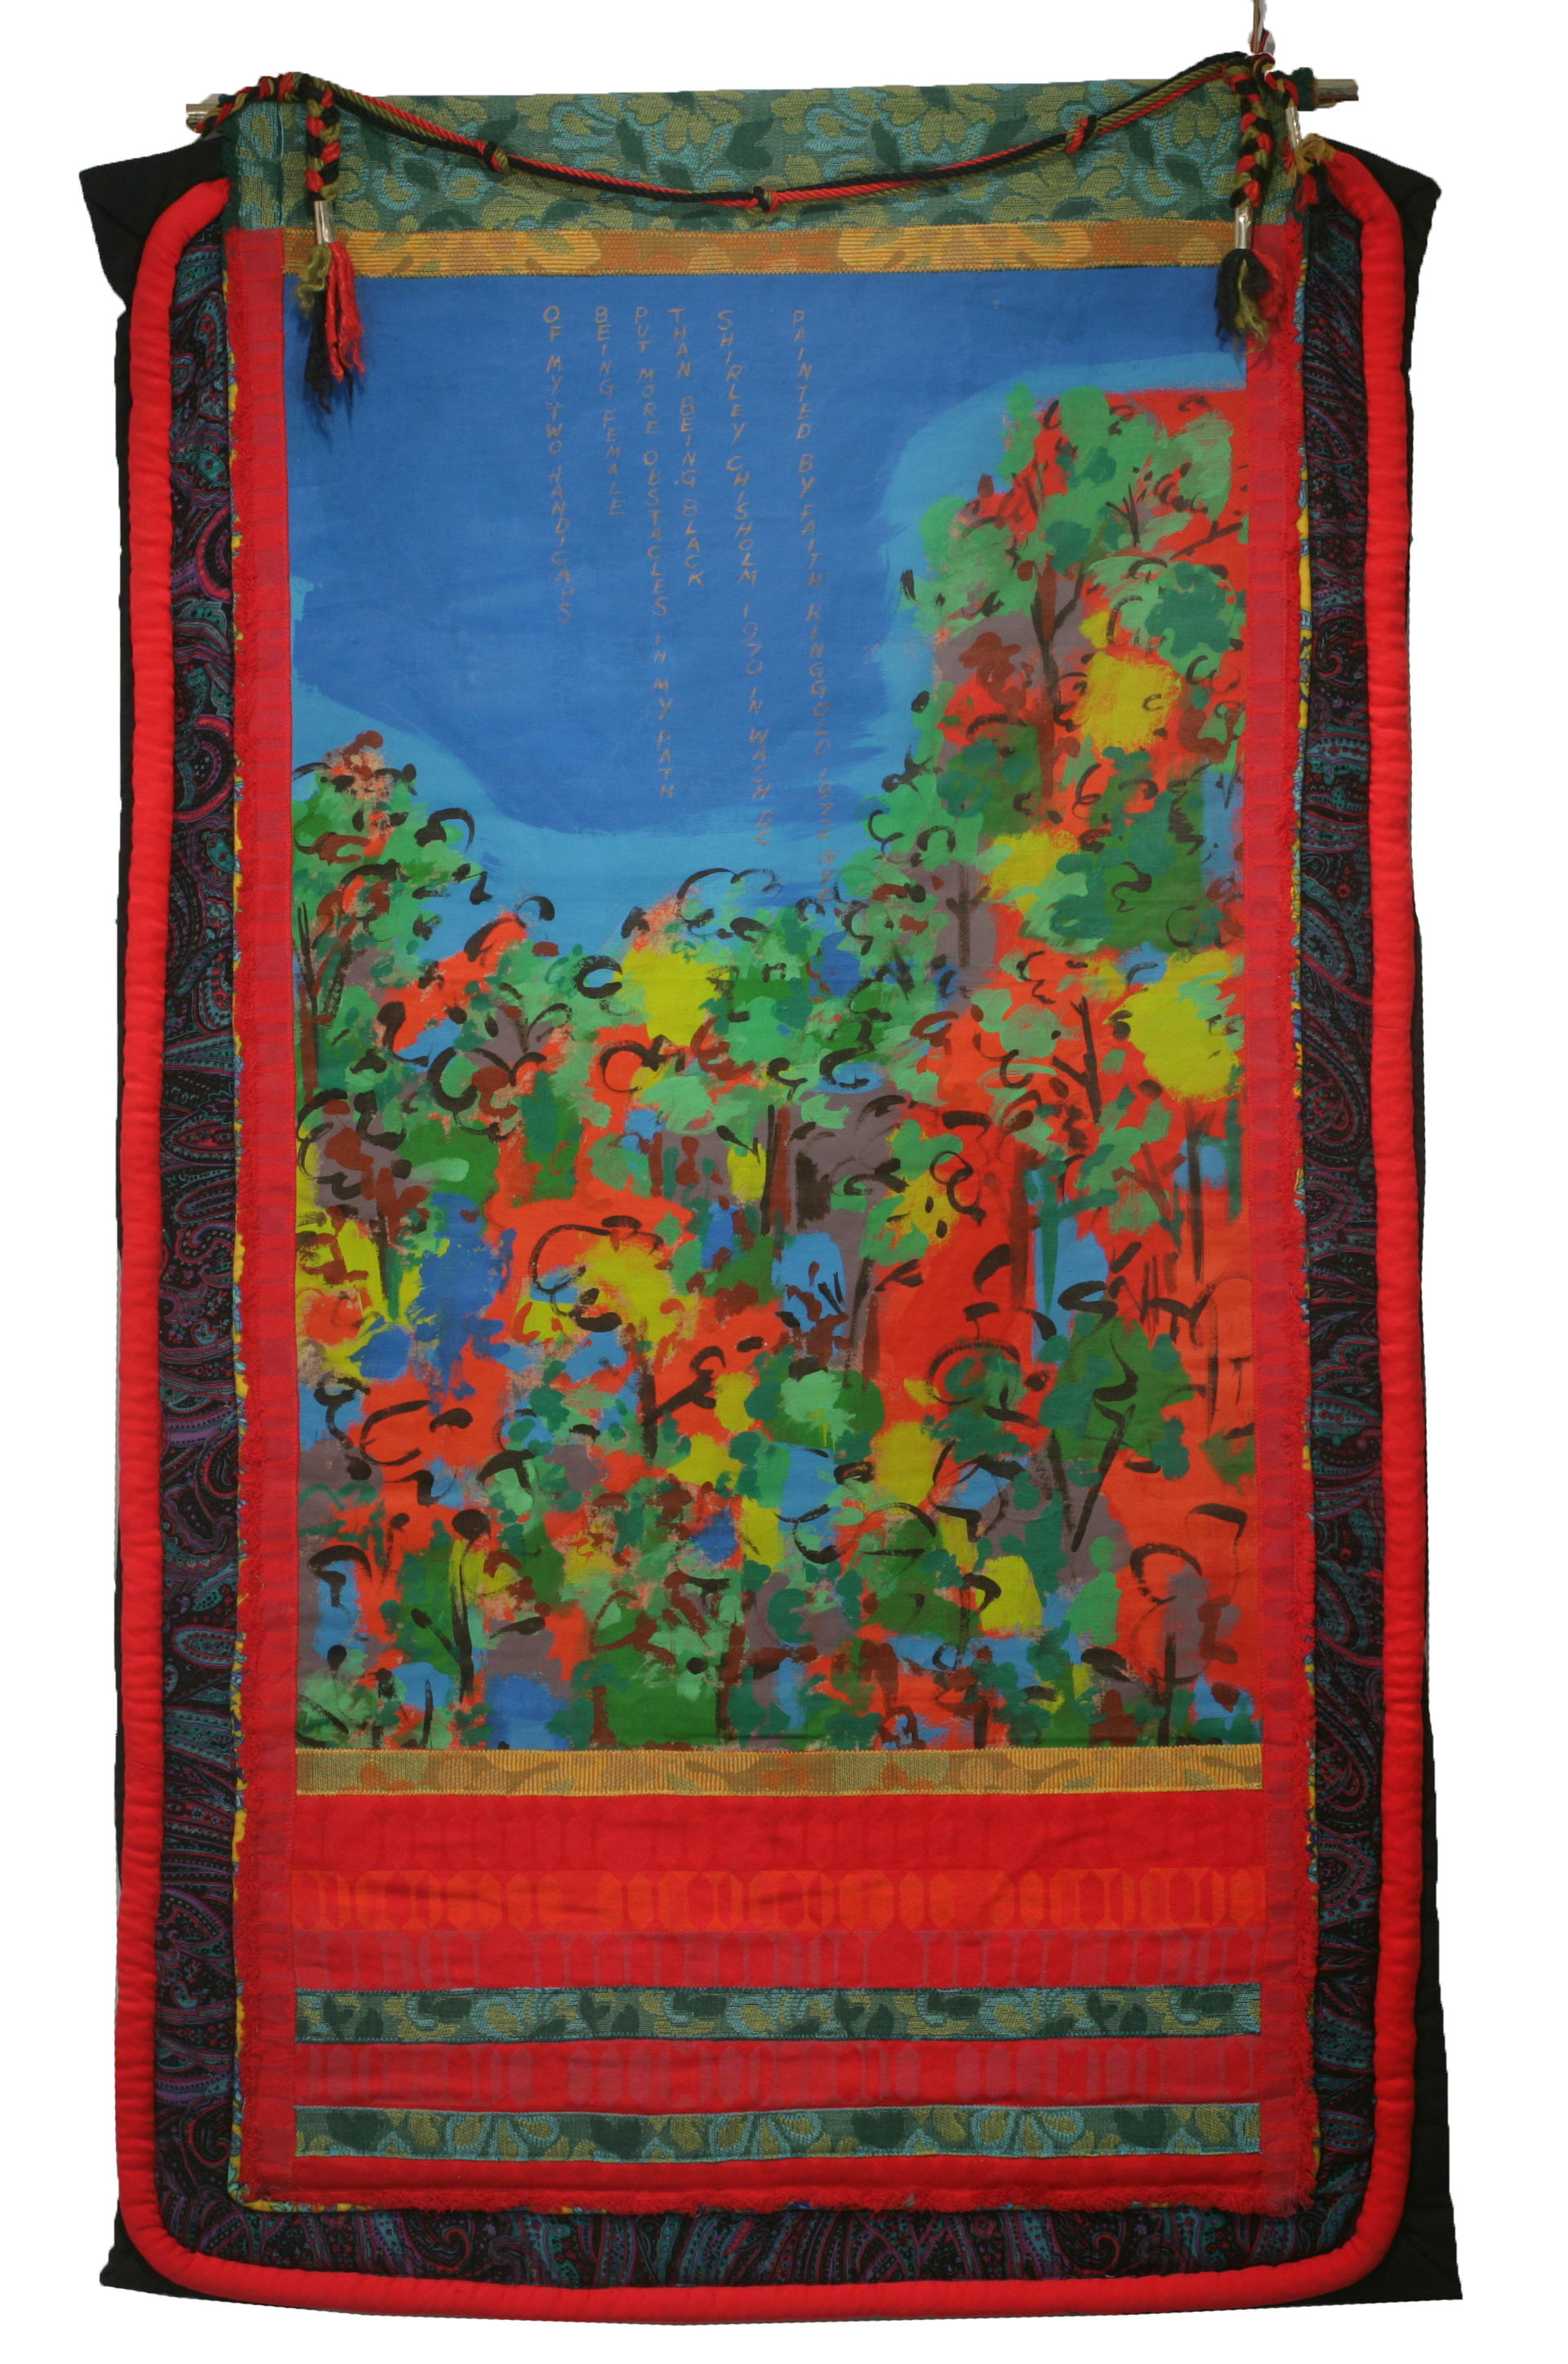 Colorful painting of treetops surrounded in a red fabric frame and with. Quote by Shirley Chisholm: “Of my two handicaps, being female put many more obstacle in my path than being black.”